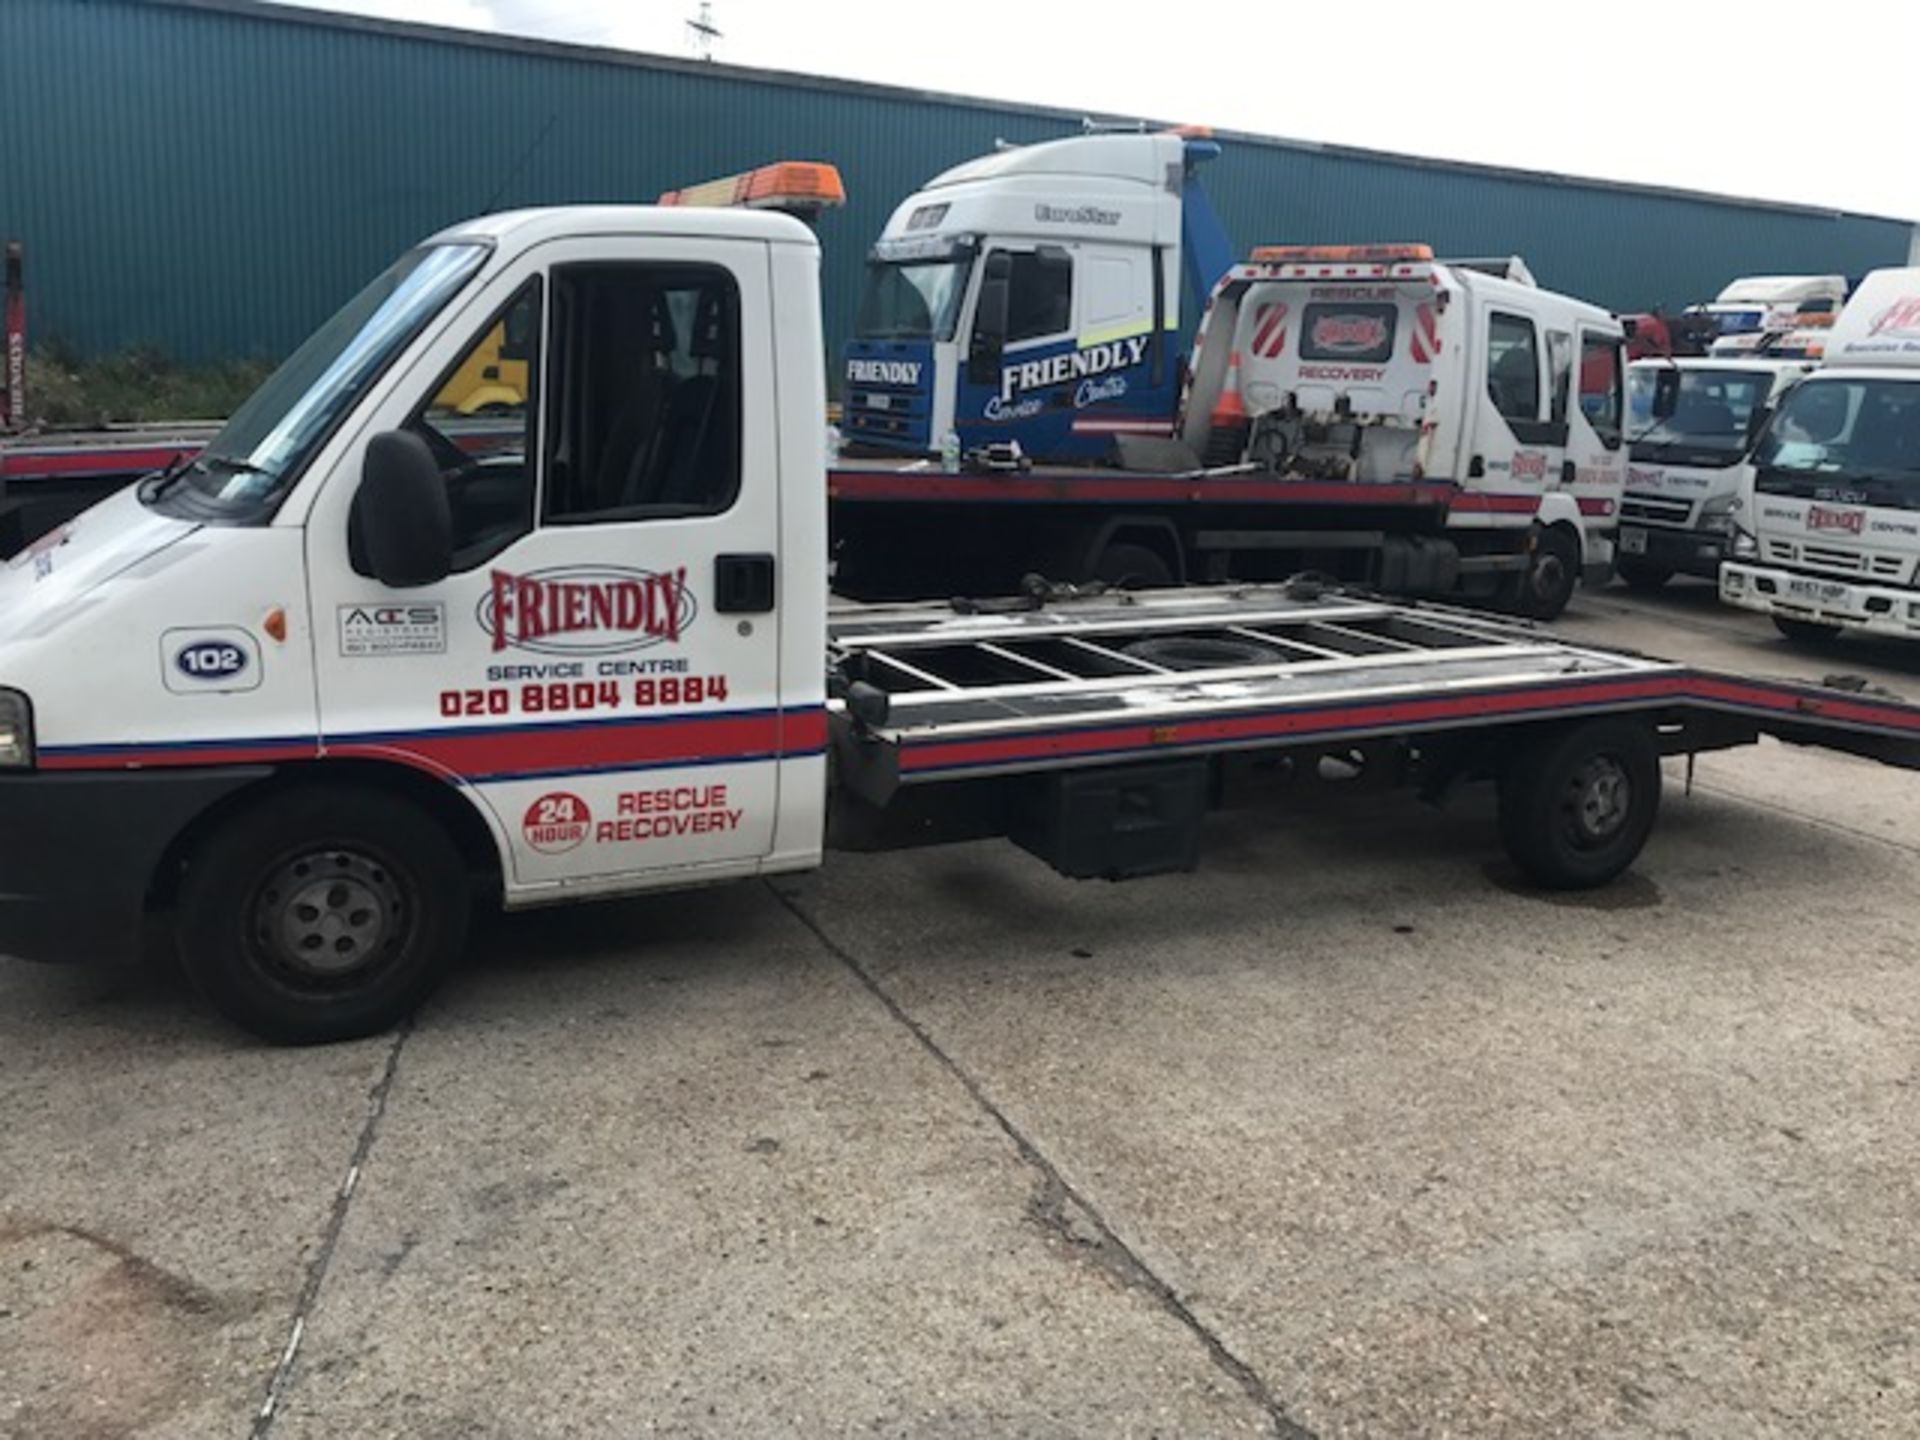 2006 Fiat Ducato 15 JTD SWB flat bed breakdown recovery vehicle complete with winch and built in - Image 4 of 10